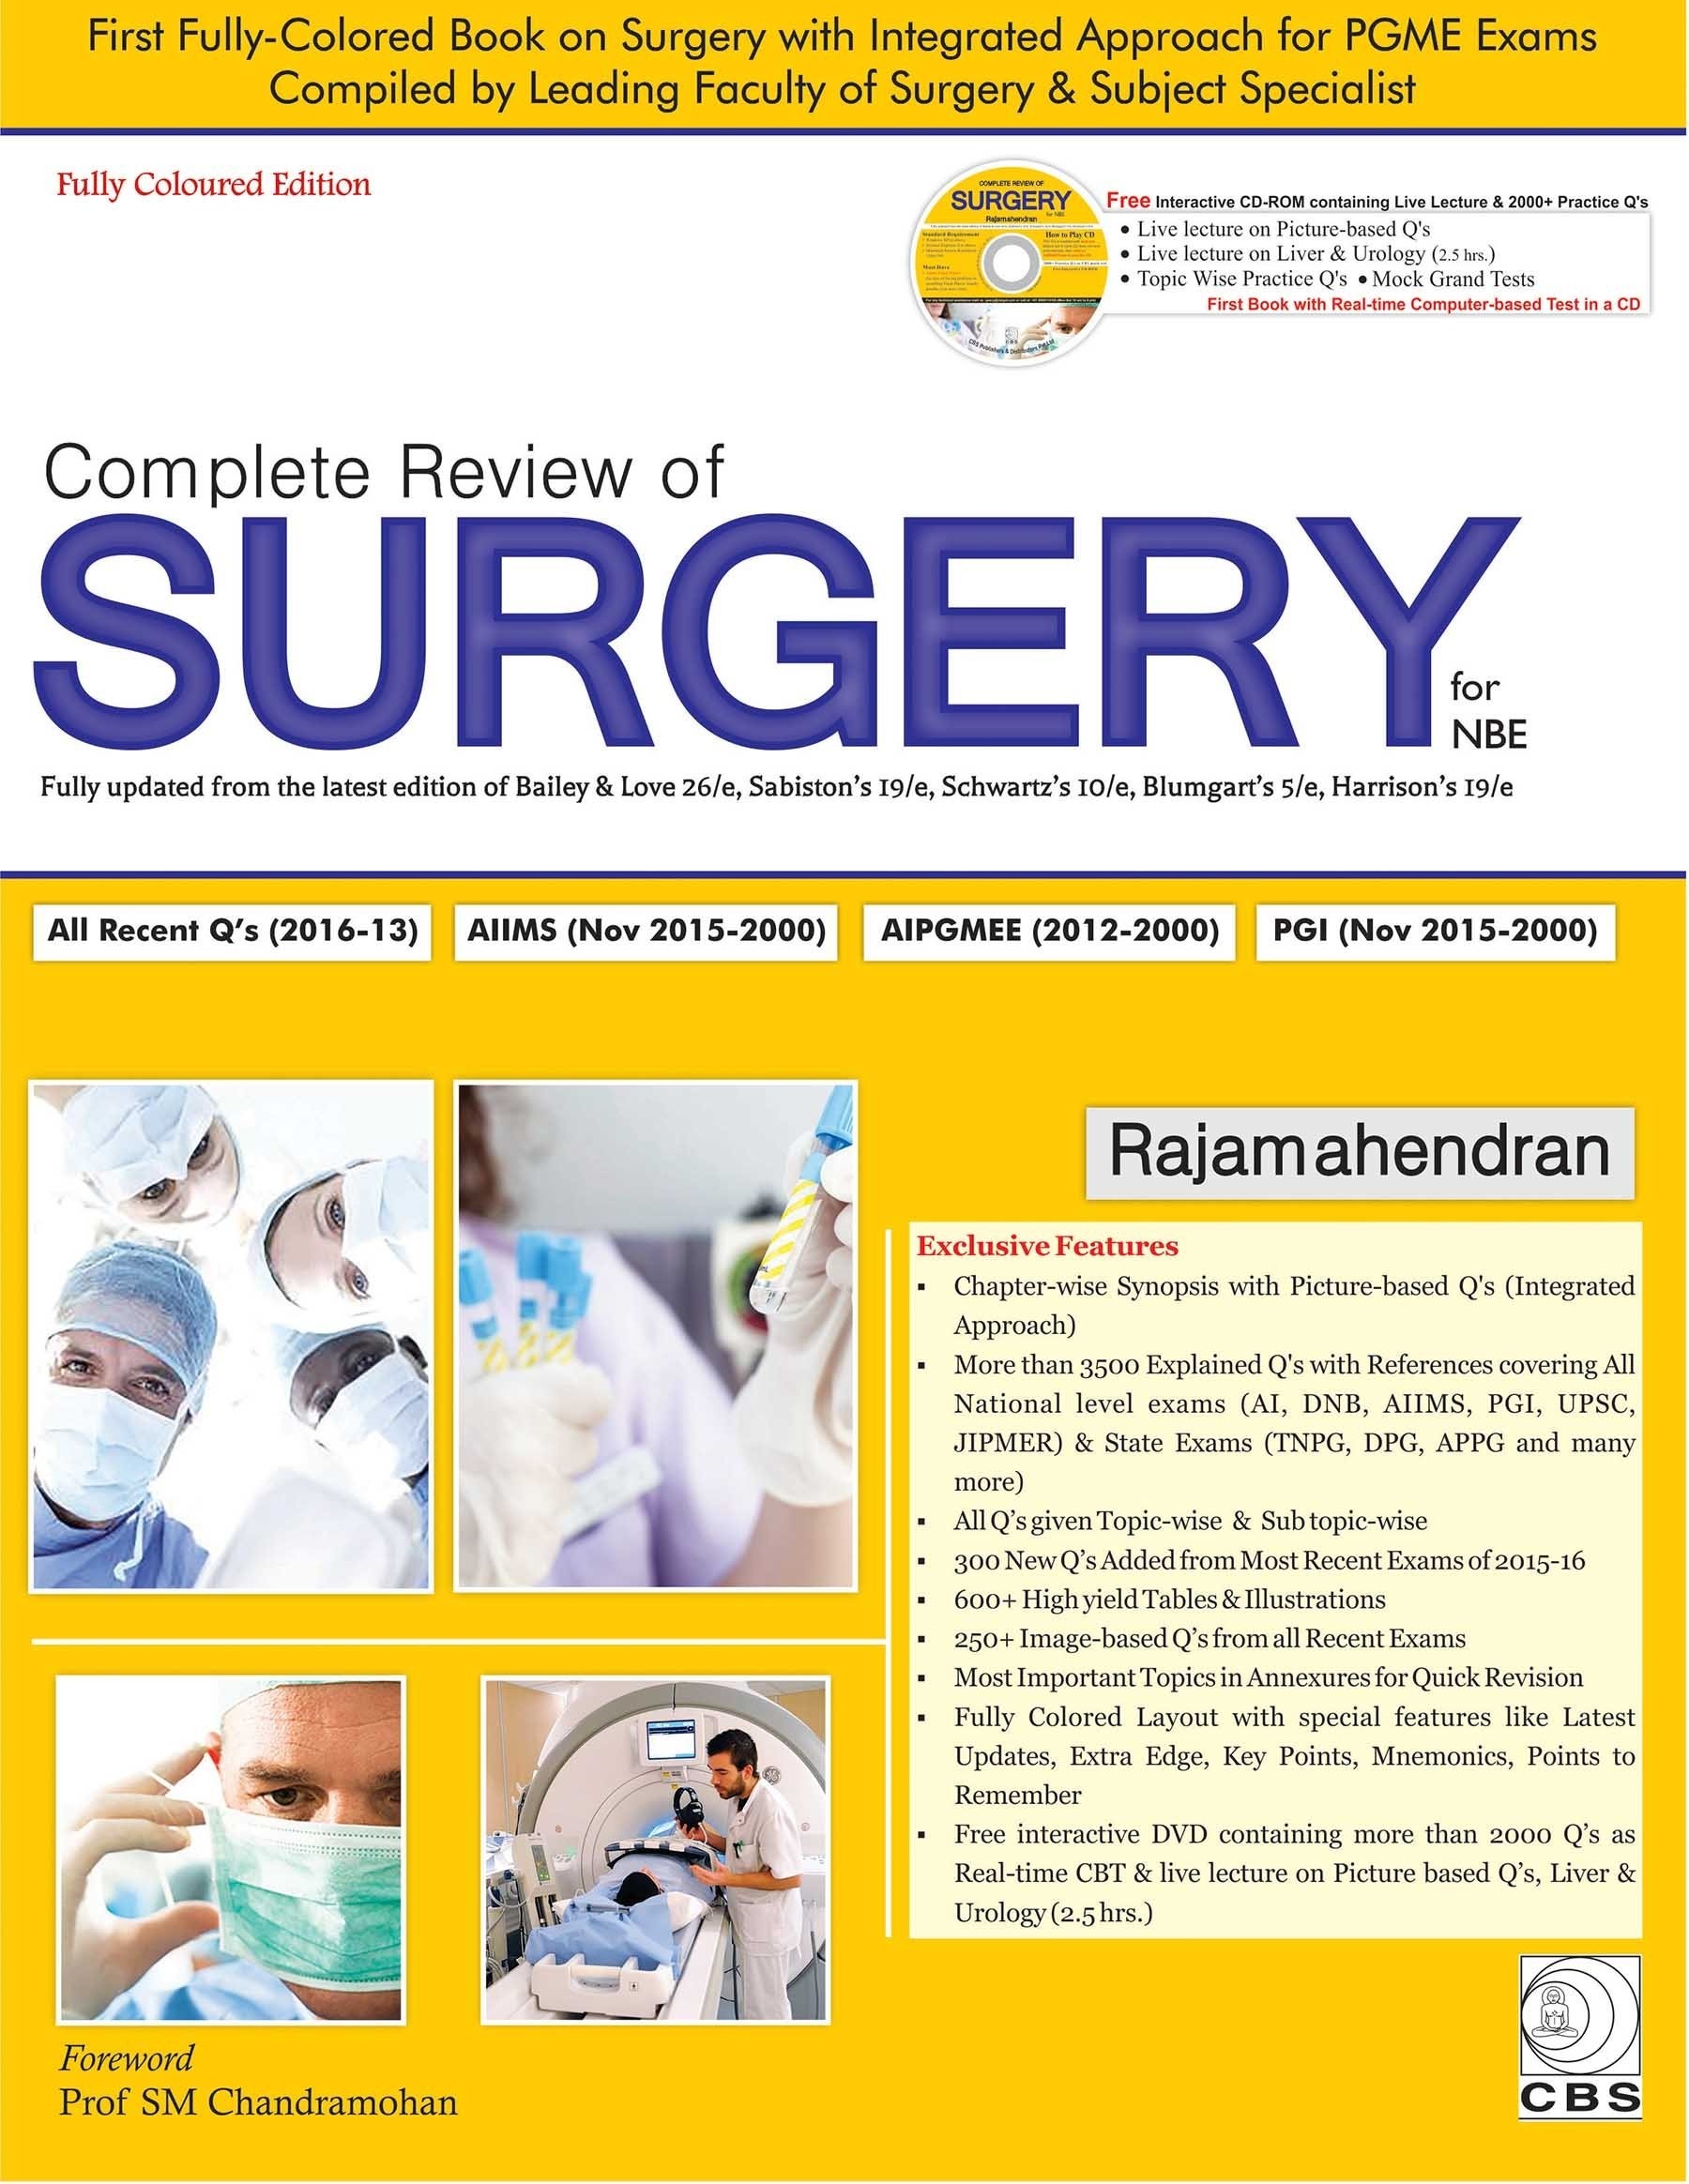 COMPLETE REVIEW OF SURGERY FOR NBE